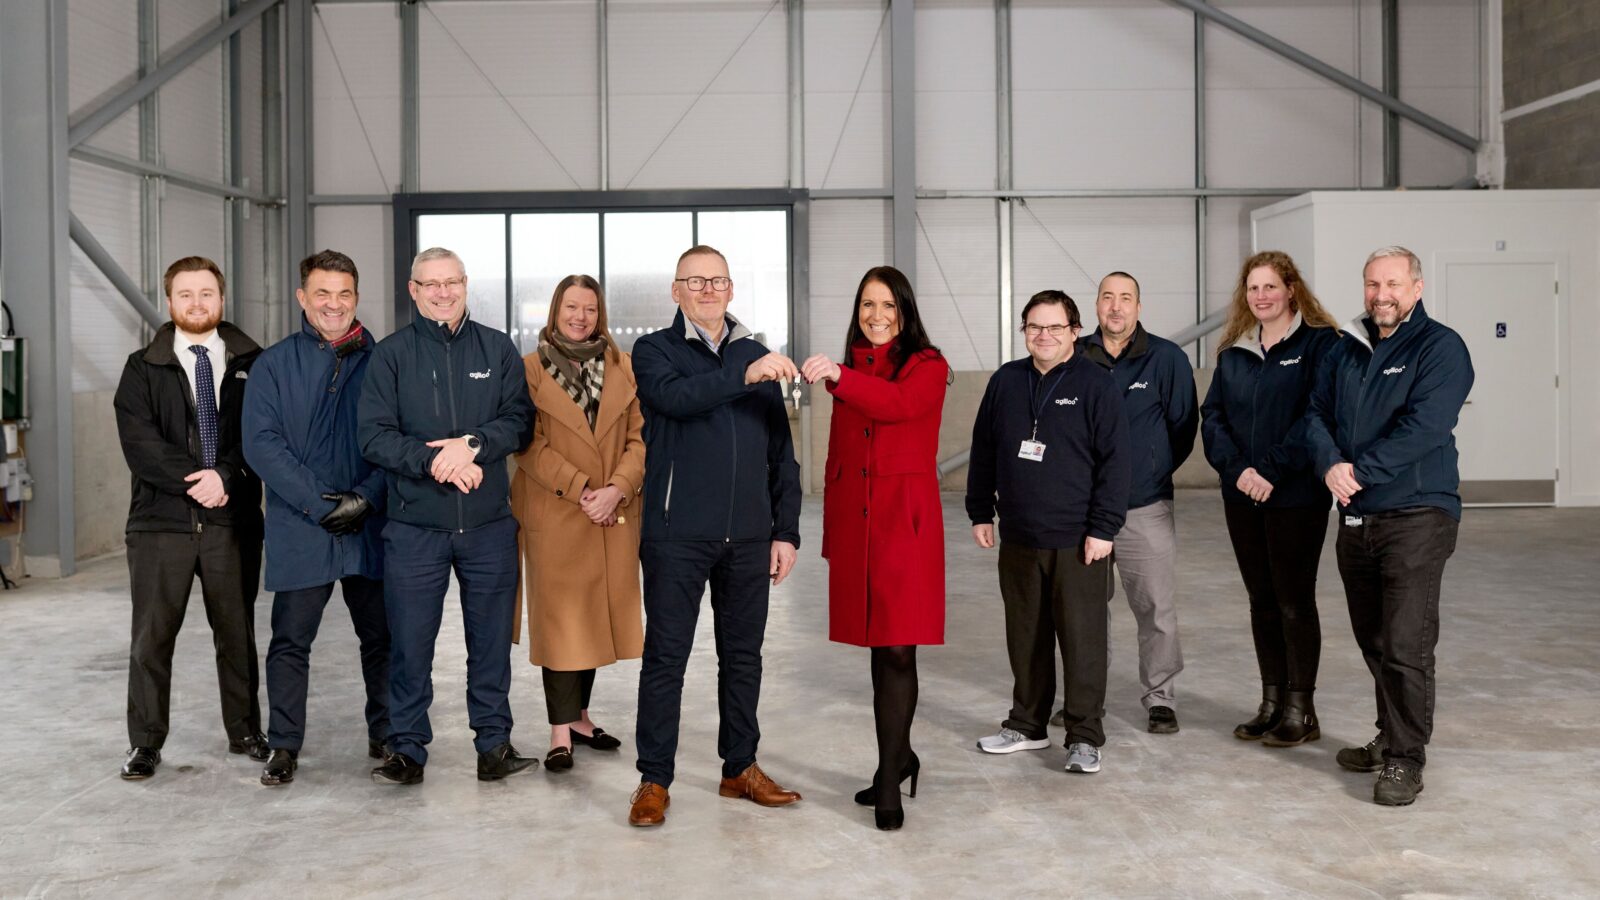 Claire Bathgate, Head of Sales at Dandara Aberdeen with Steve Clark, Regional Sales Director at Agilico, along with members of the Agilico team.